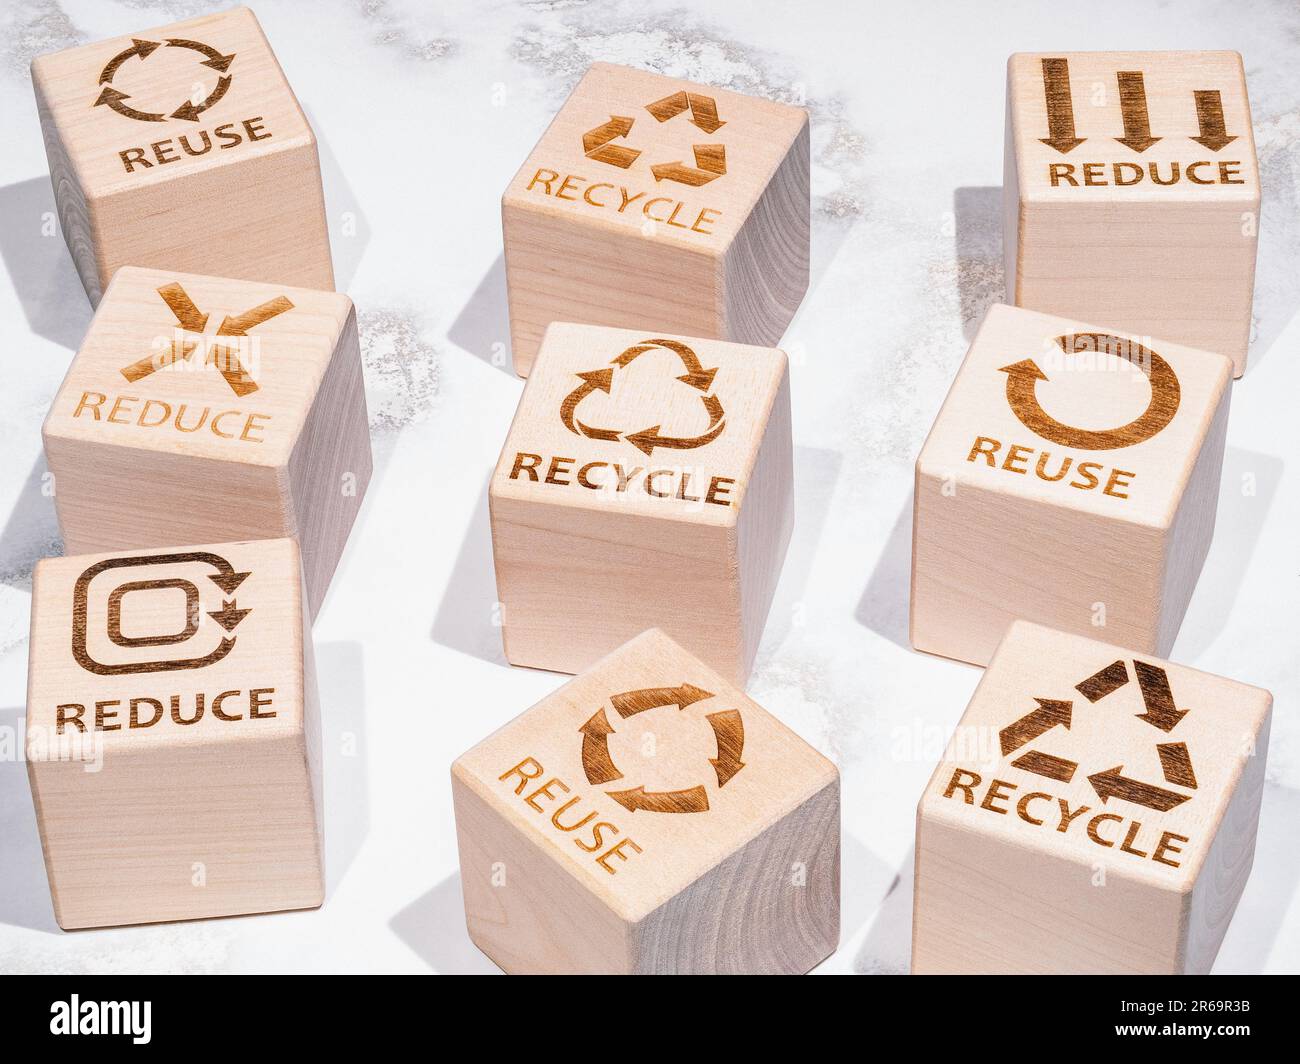 Reduce, Reuse, and Recycle symbols as an ESG concept Stock Photo